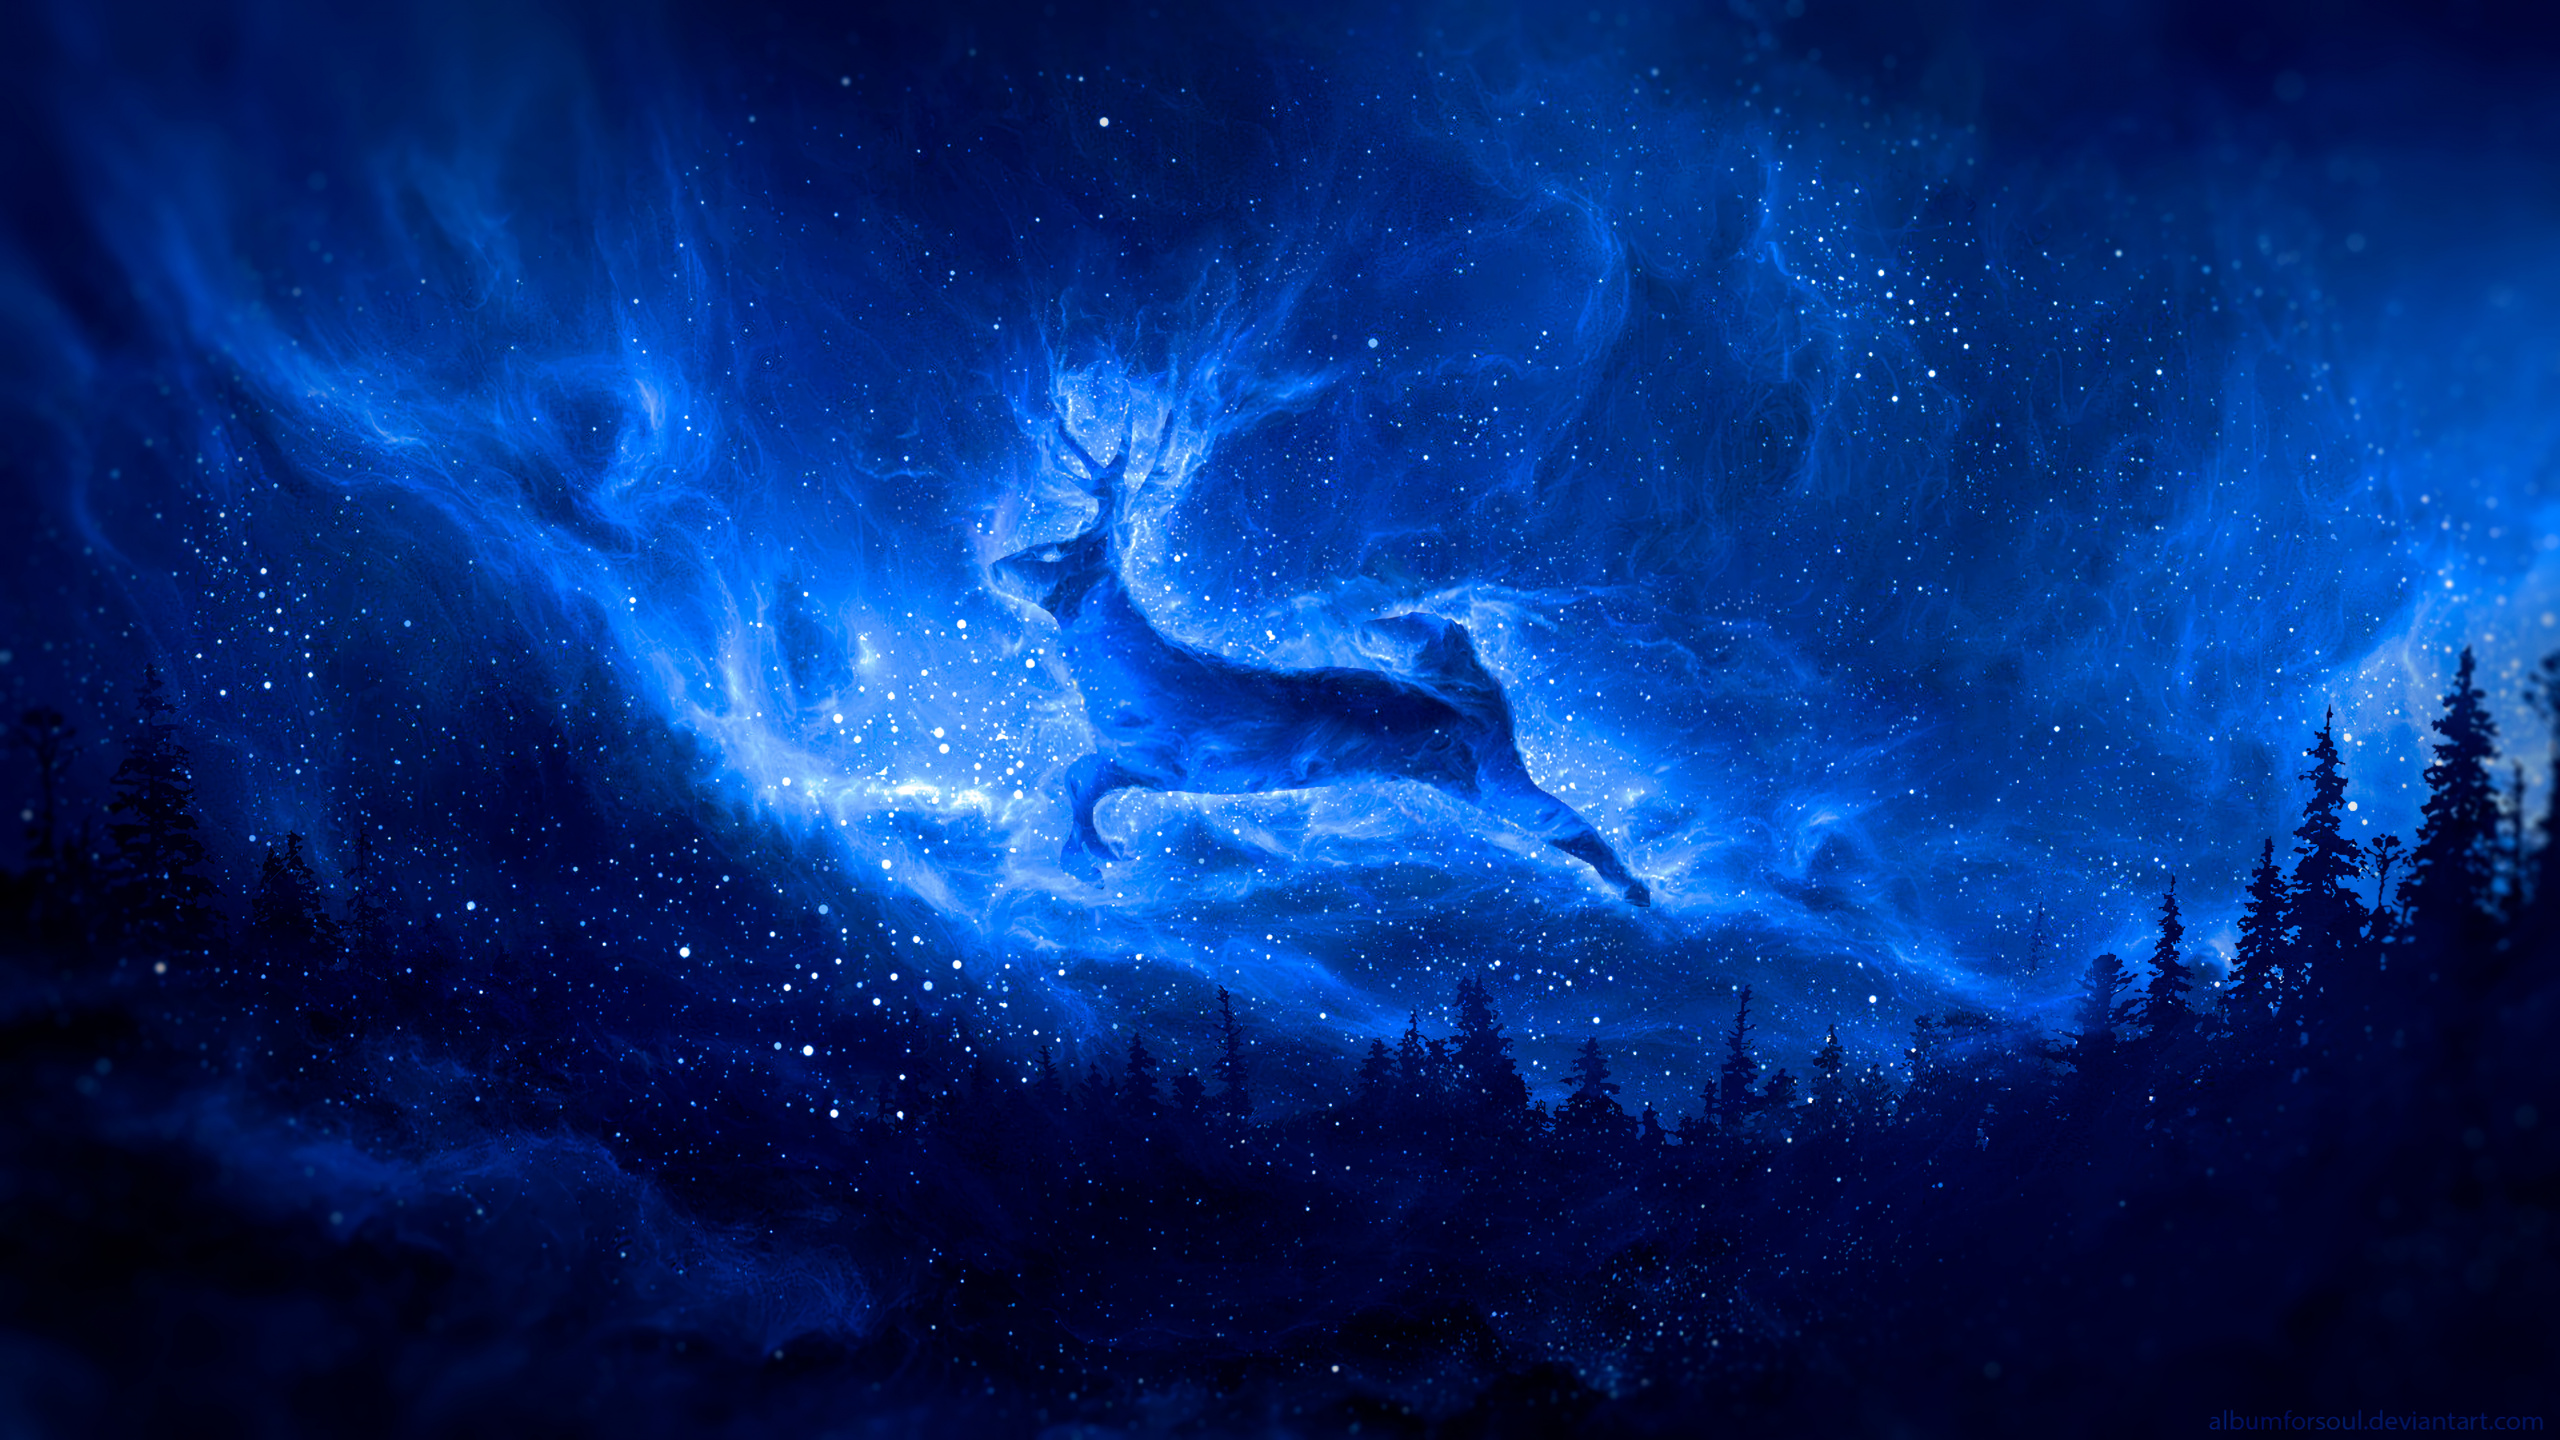 Blue and White Galaxy Illustration. Wallpaper in 2560x1440 Resolution